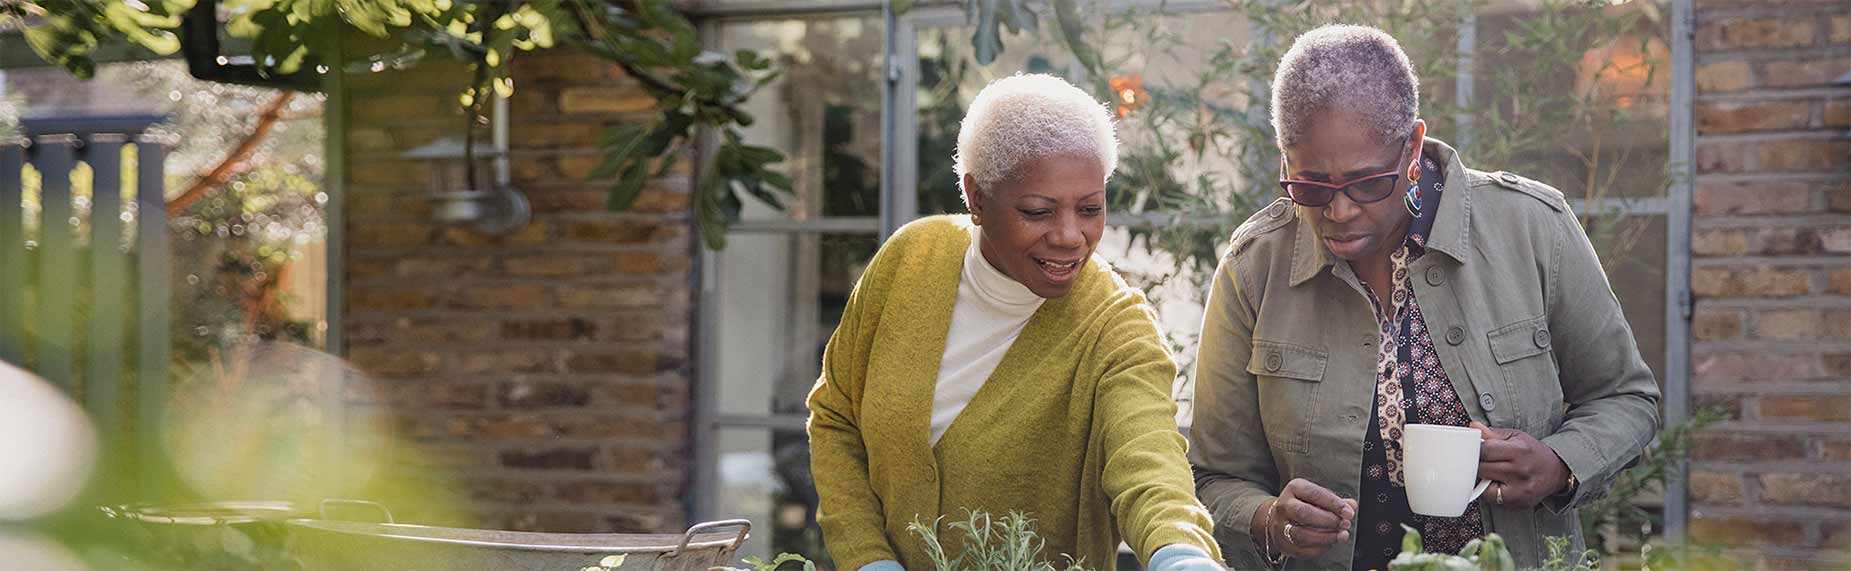 Two mature women in a garden chatting and catching up while one of them does gardening work.